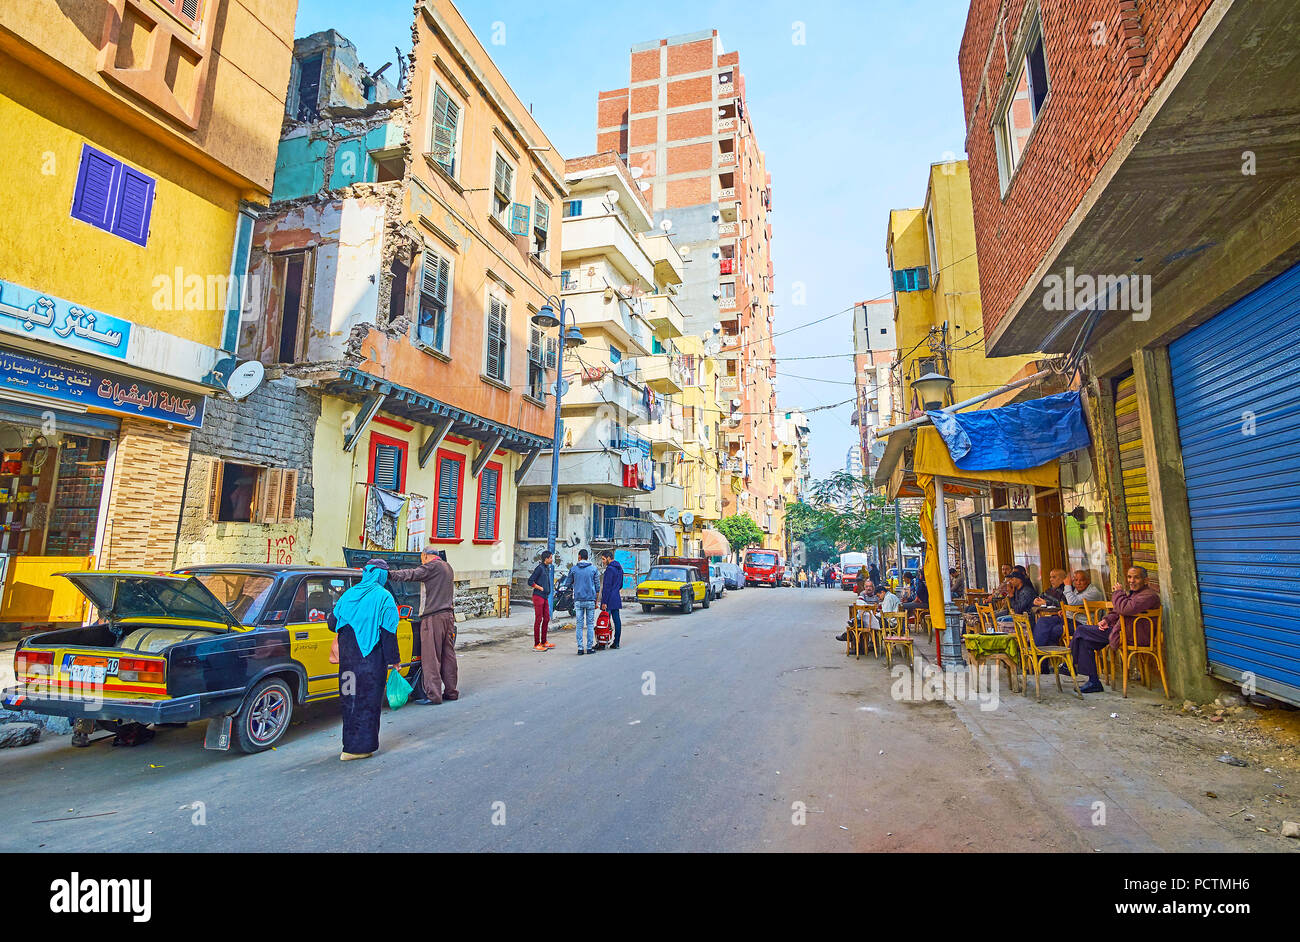 ALEXANDRIA, EGYPT - DECEMBER 18, 2017: The street of old and poor Karmouz district with old houses, unfinished buildings, neighboring with newly built Stock Photo